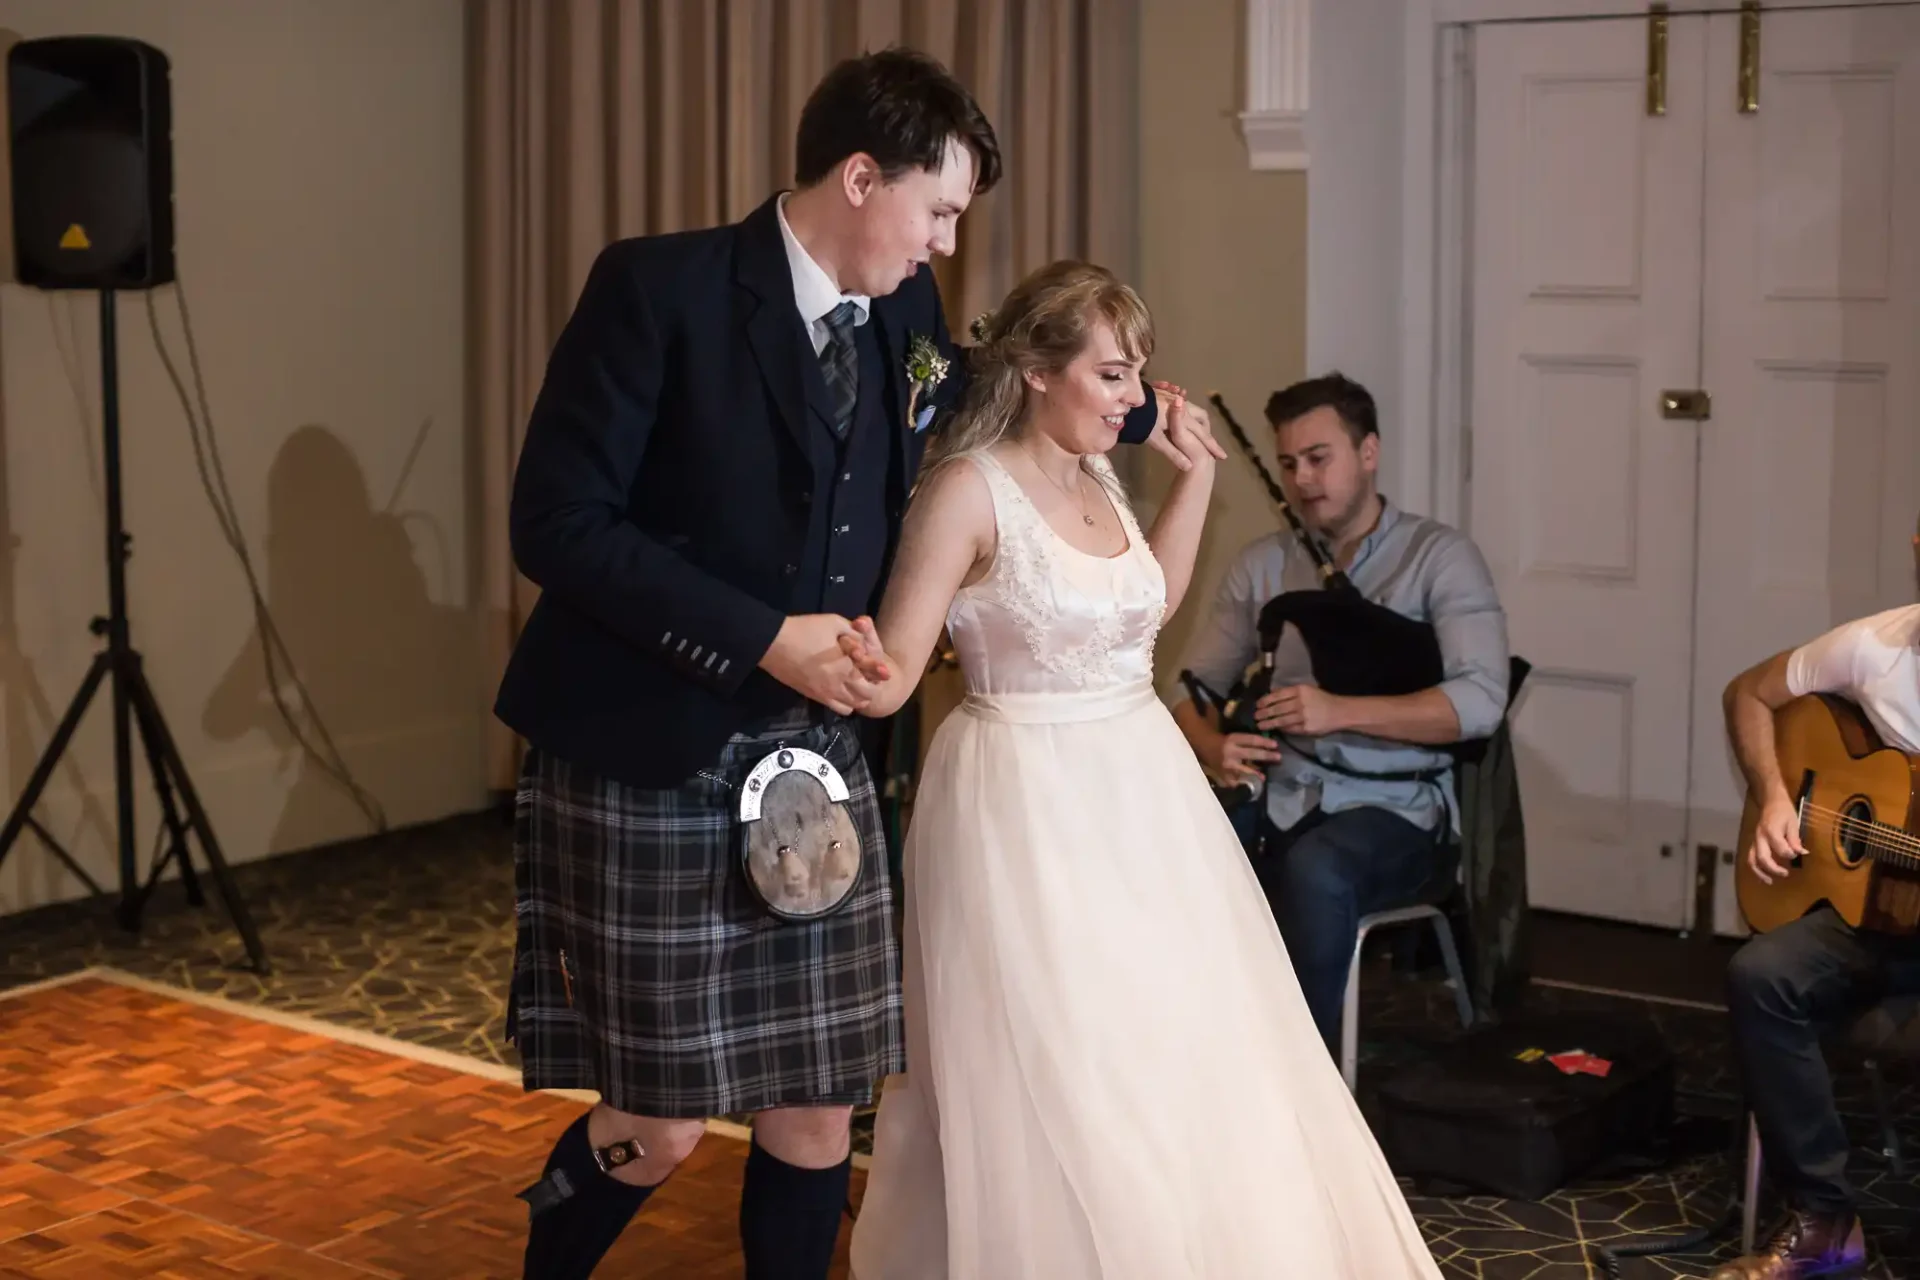 A bride and groom in wedding attire dancing joyfully, the groom wearing a kilt, with musicians playing in the background.